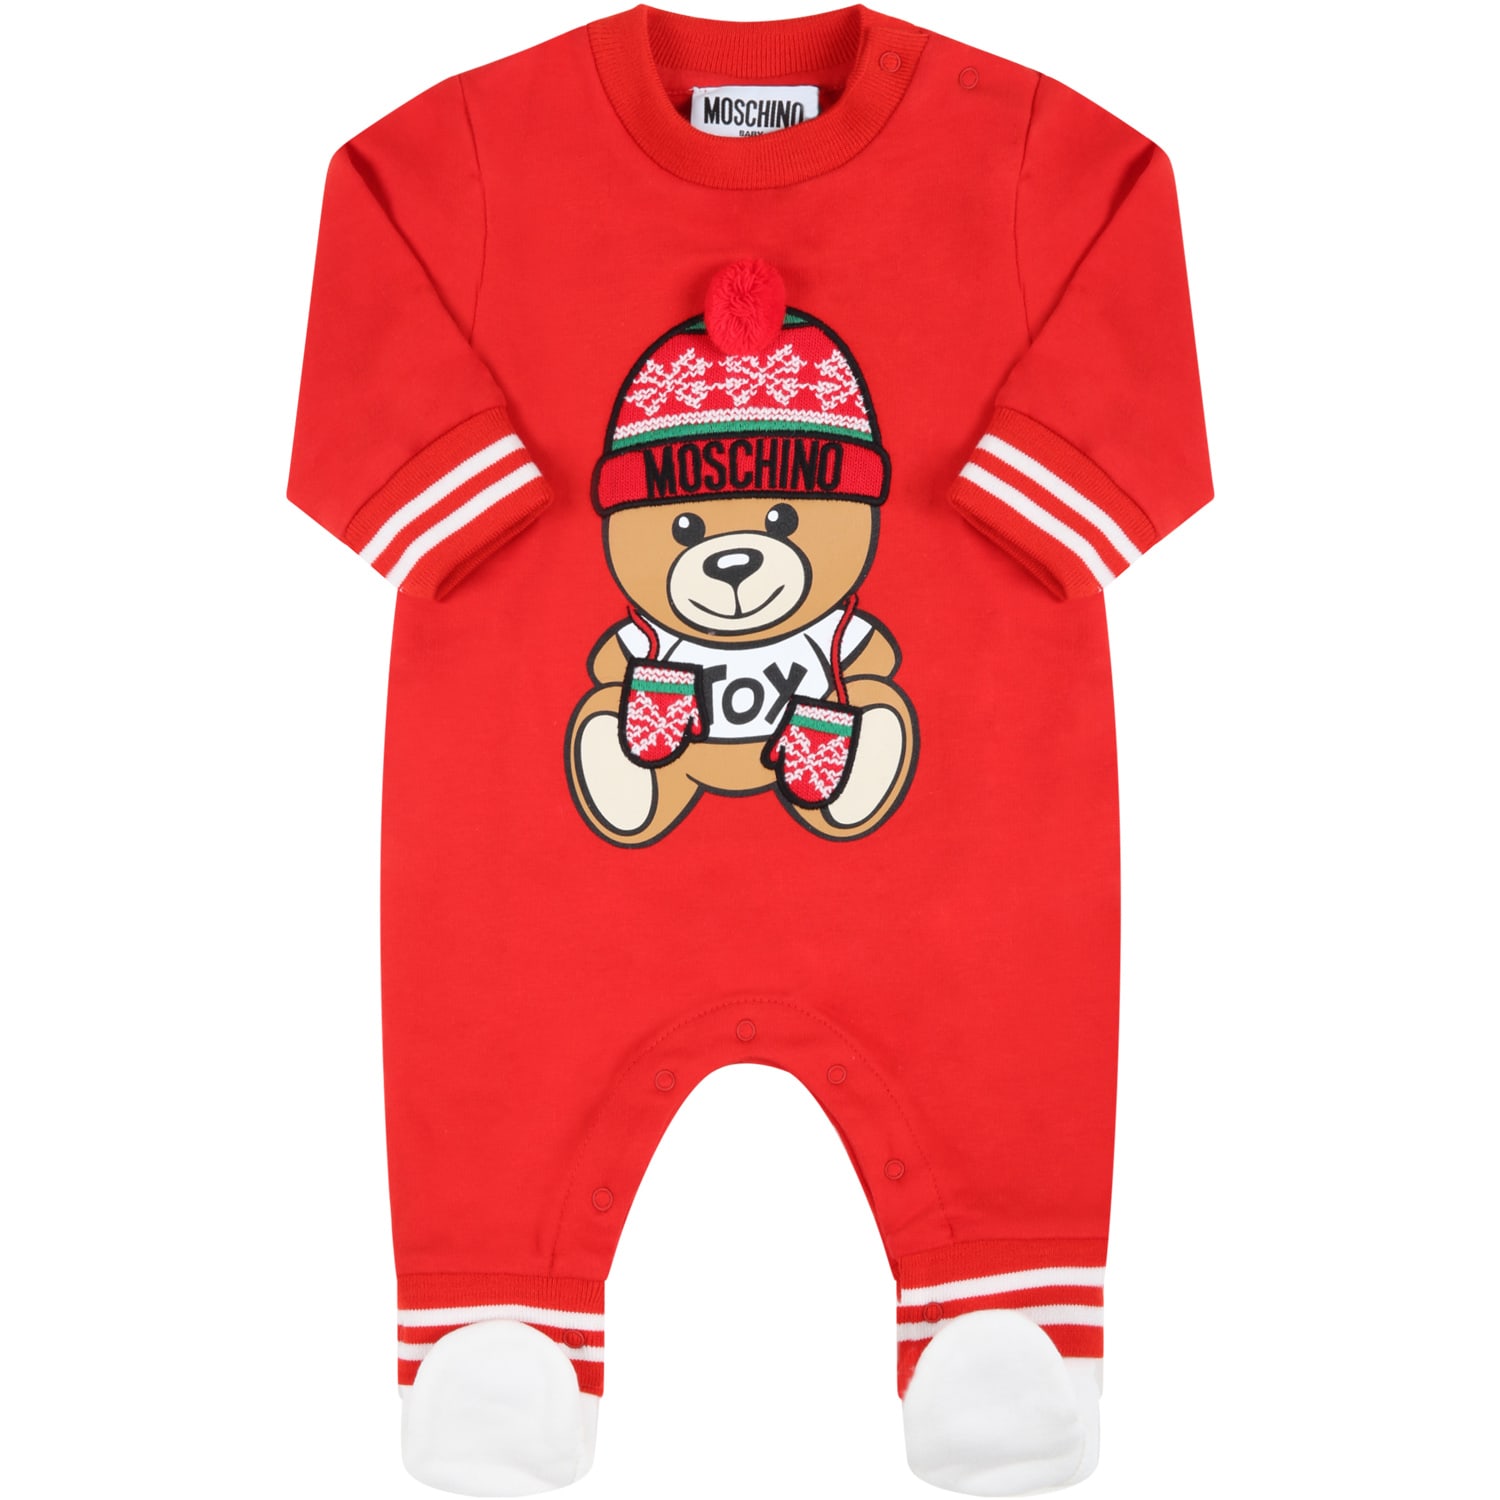 Moschino Red Babygrow For Baby Kids With Teddy Bear